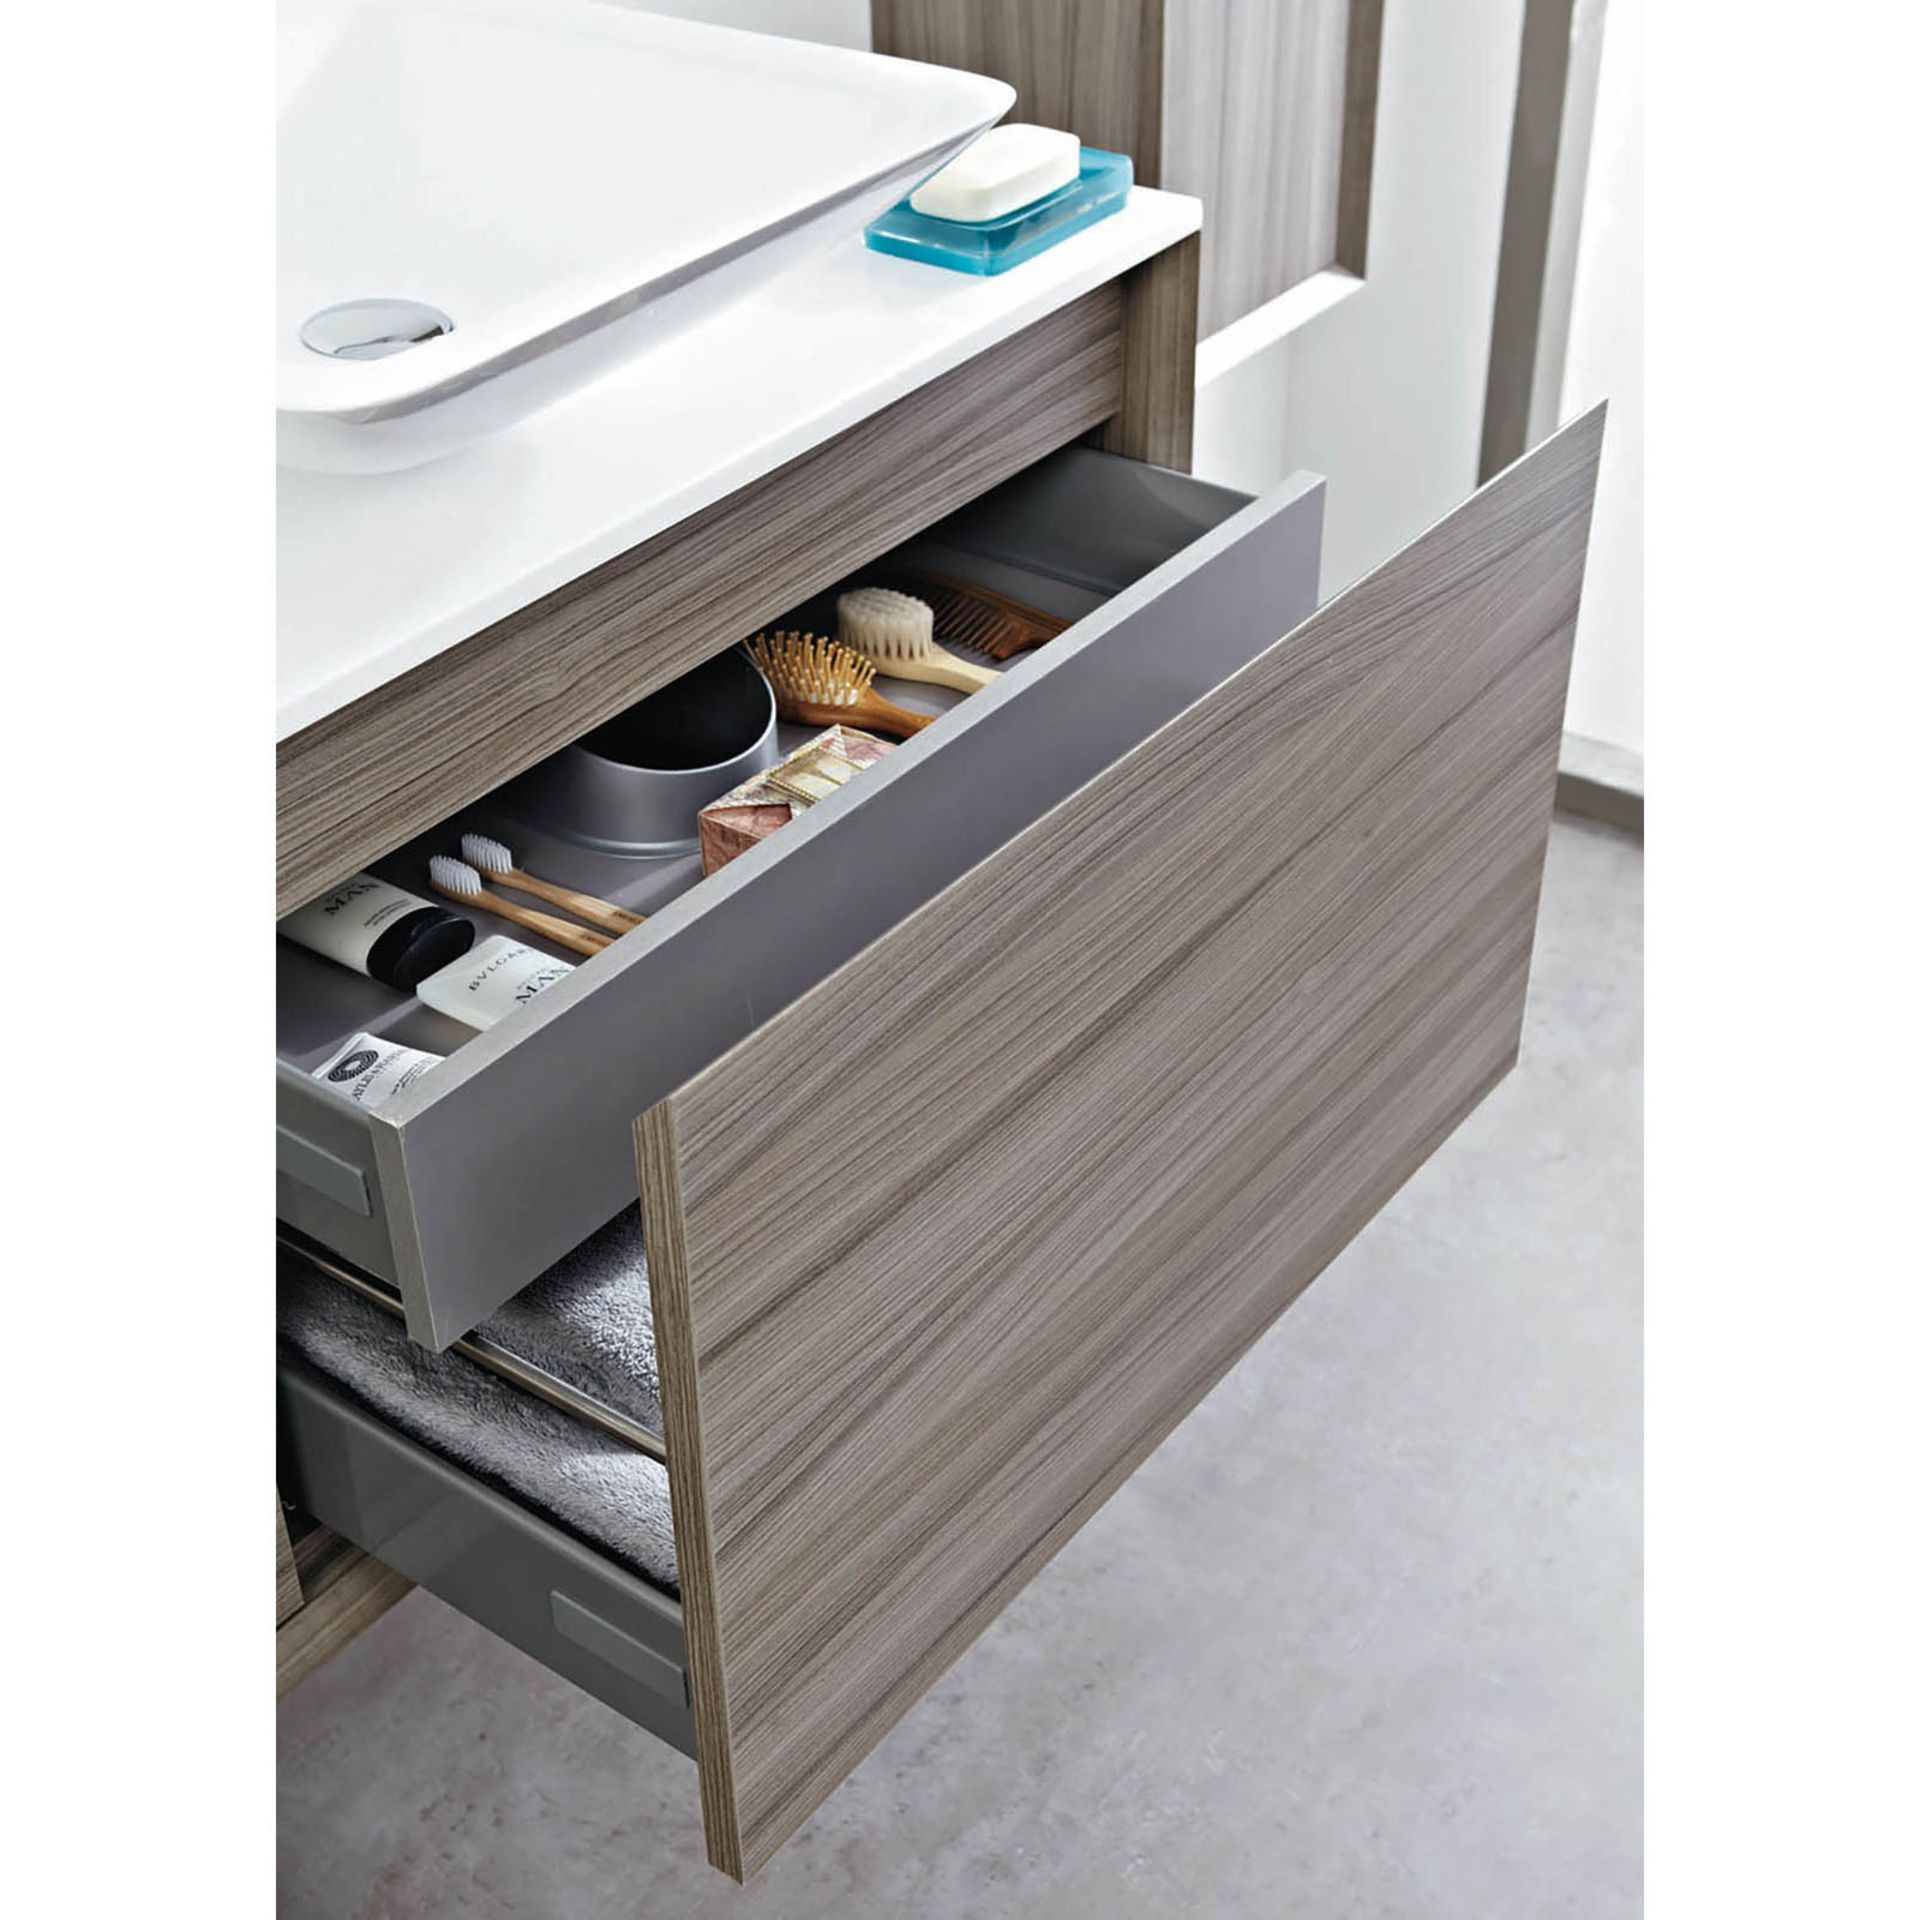 Enzo 1200 x 457 x 450mm designer wall hung vanity unit in Nilo finish with sparkling white solid su - Image 2 of 2